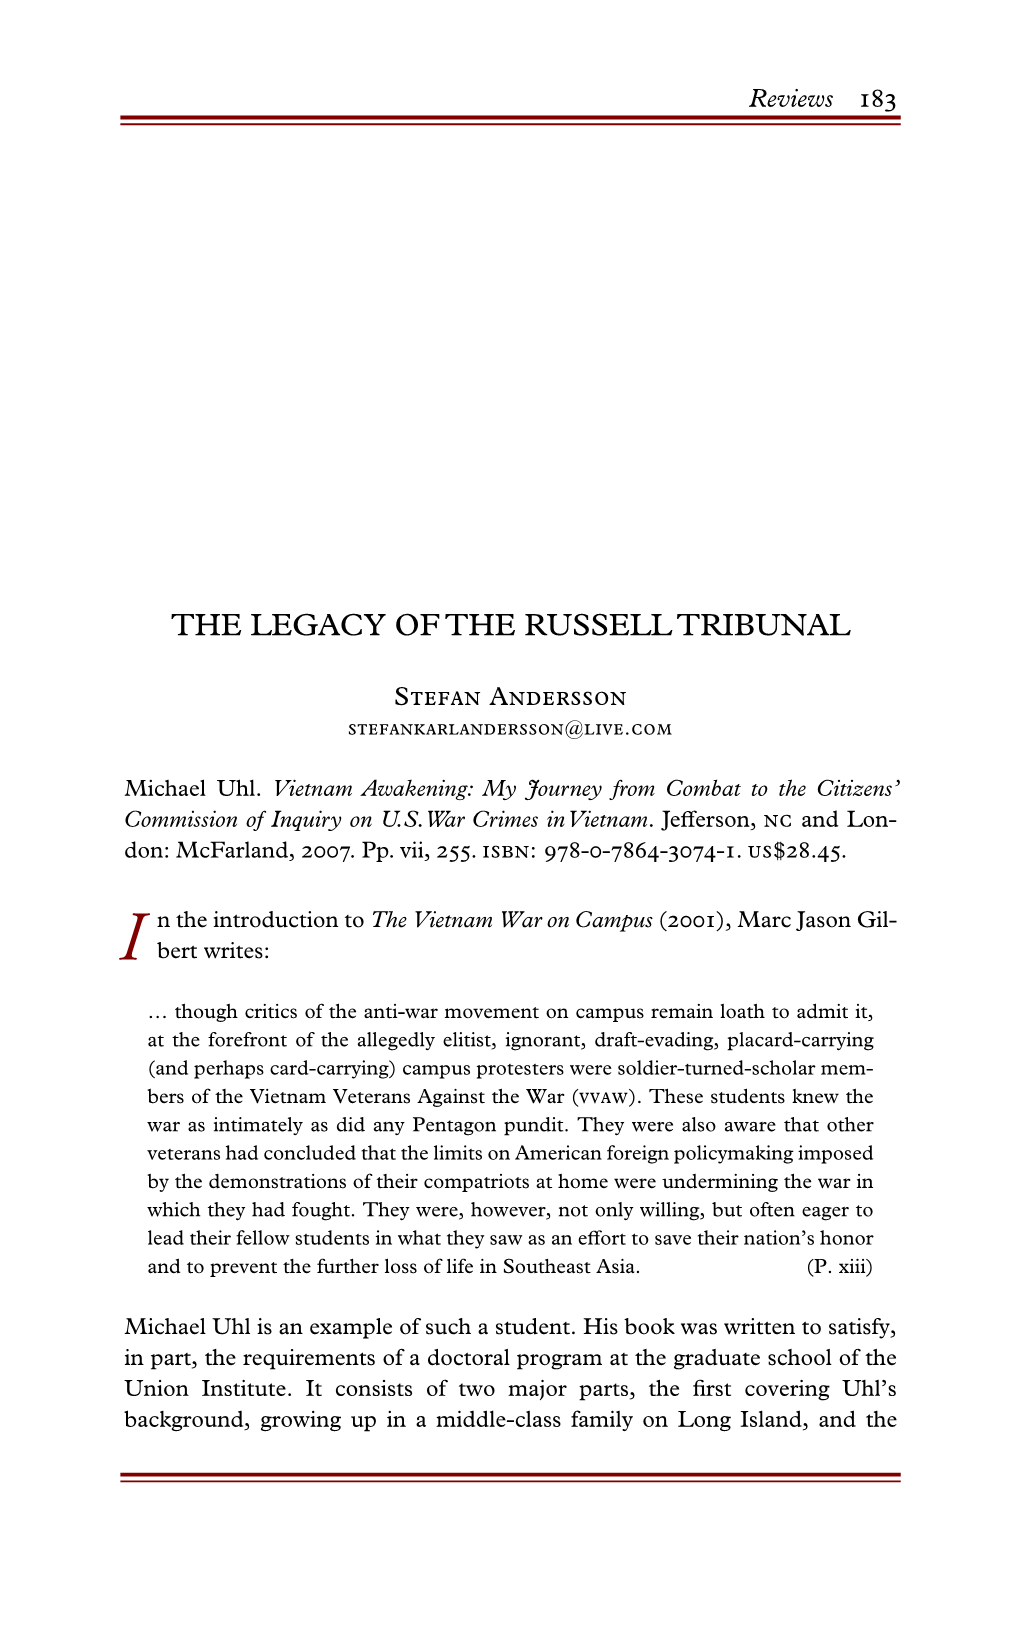 The Legacy of the Russell Tribunal